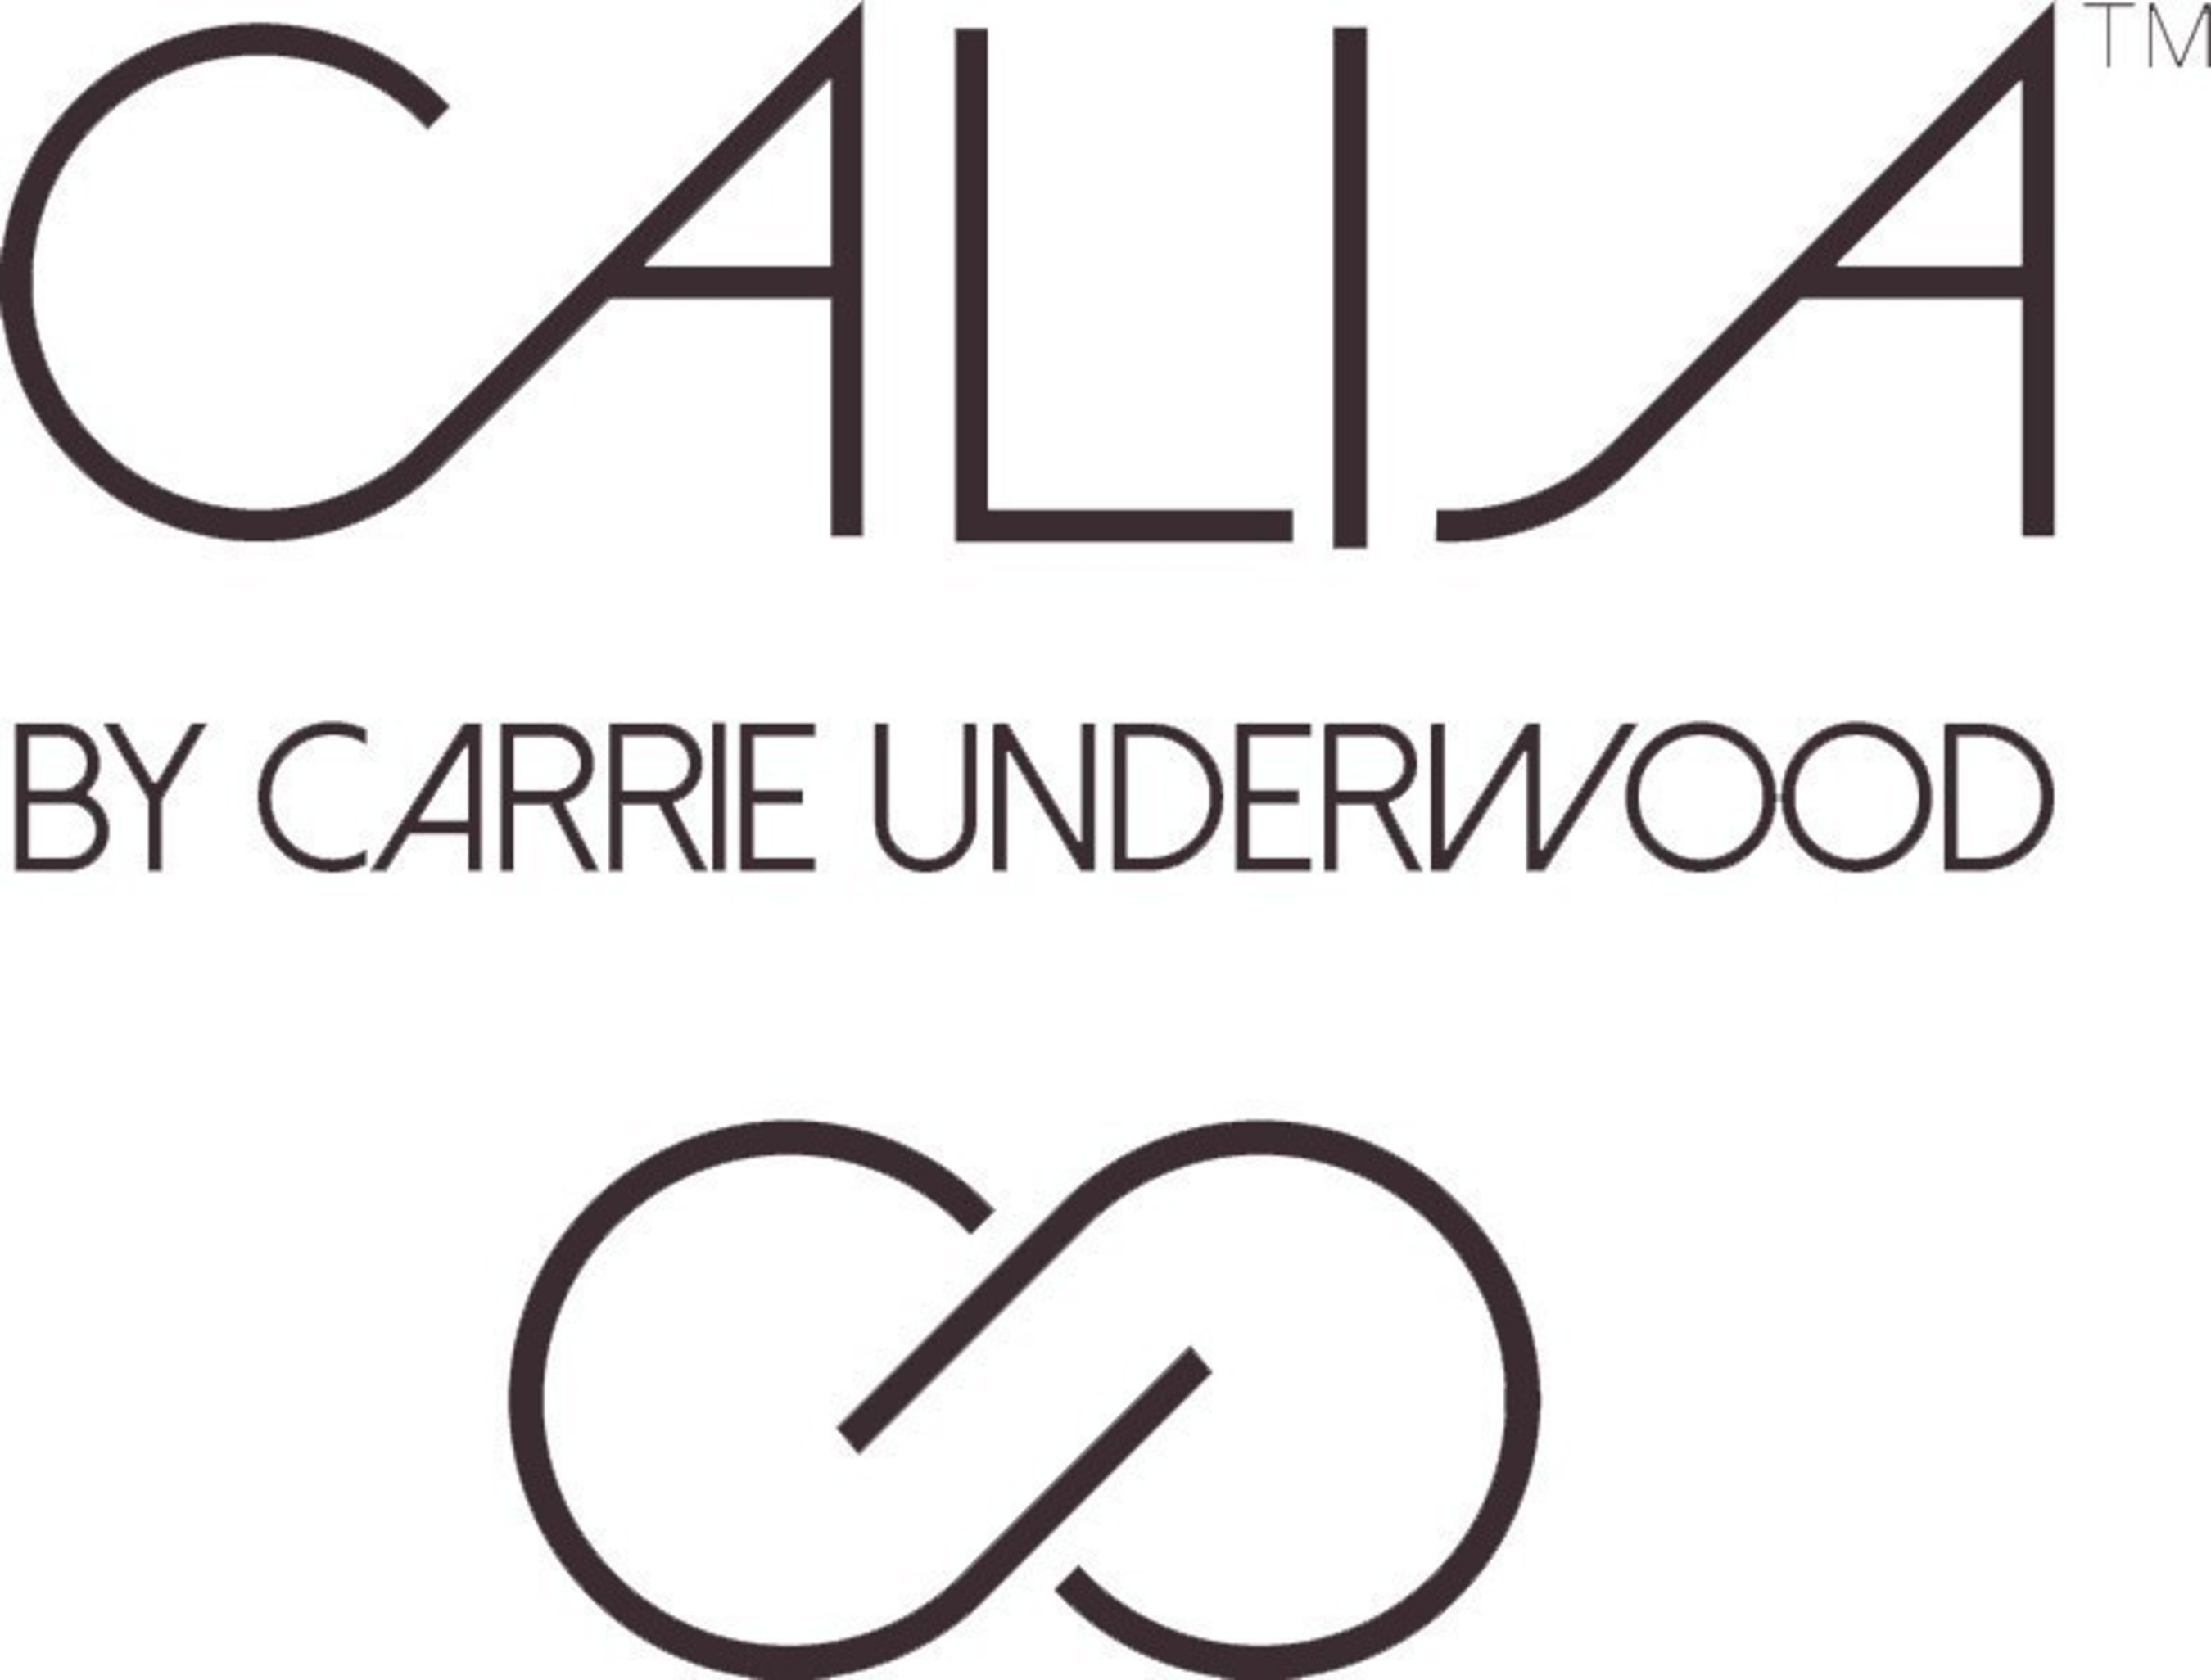 CALIA by Carrie Underwood in partnership with The DICK'S Sporting